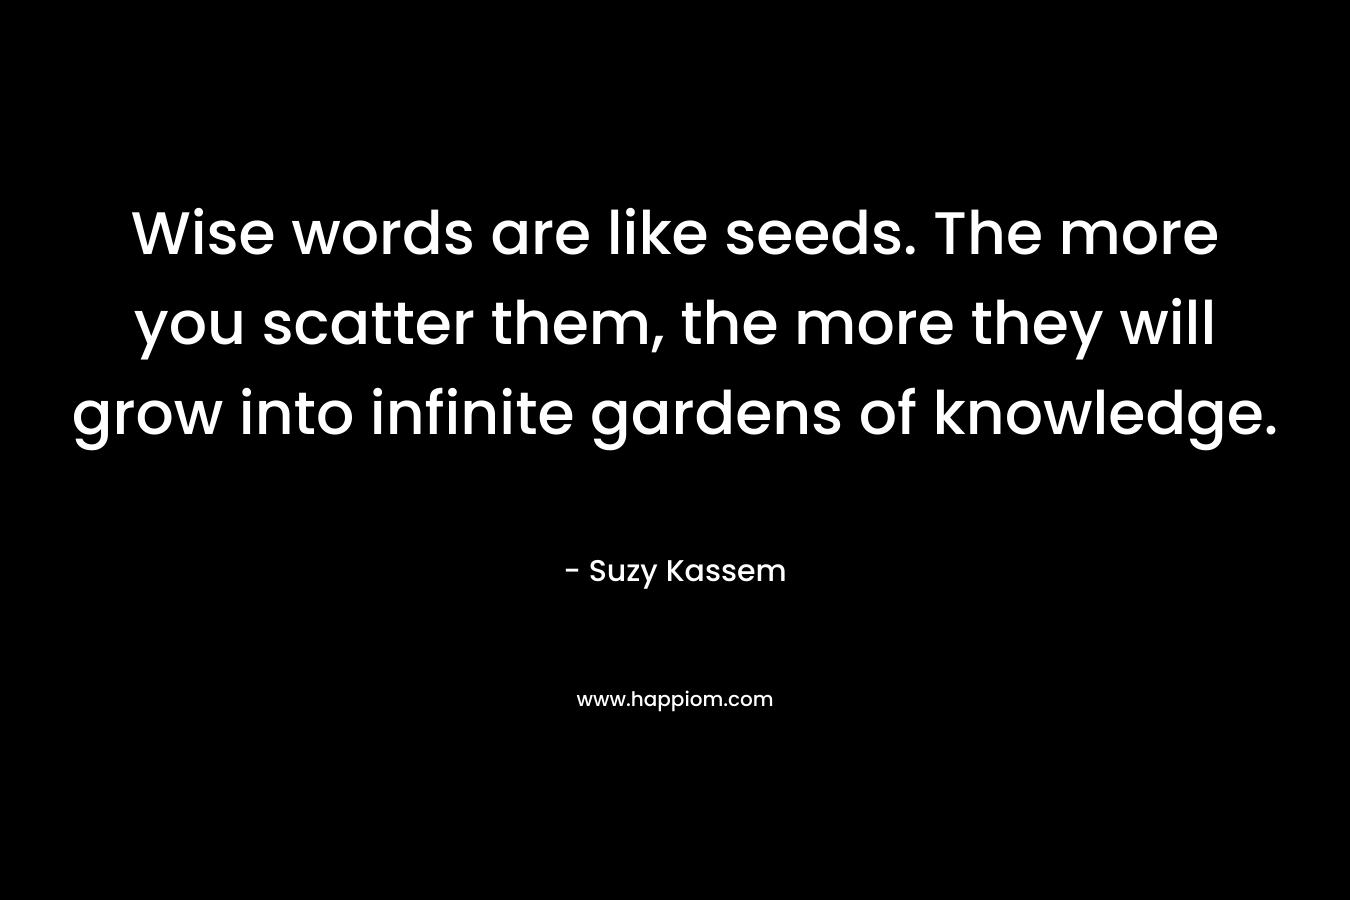 Wise words are like seeds. The more you scatter them, the more they will grow into infinite gardens of knowledge. – Suzy Kassem